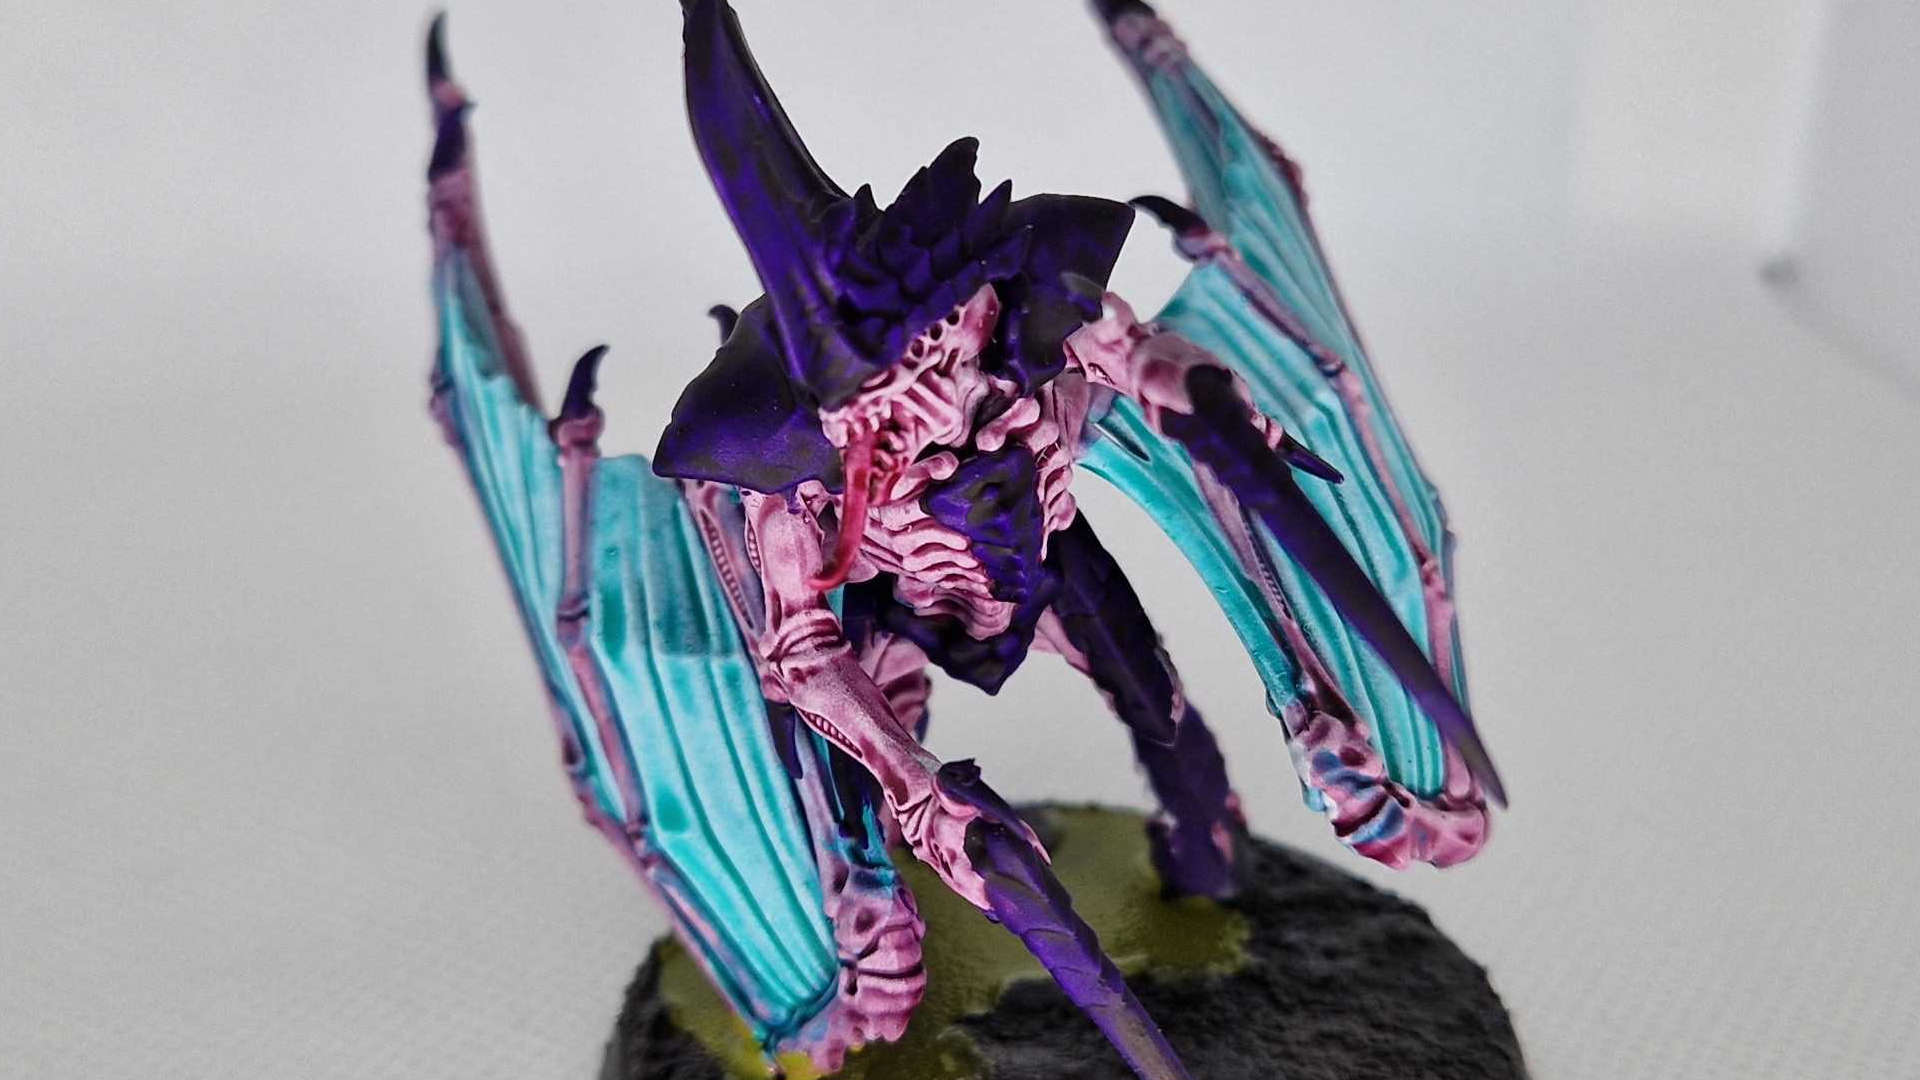 Tyranid Screamer-killer 10th Edition Leviathan Painted Miniature for Sale, Warhammer  40k and Age of Sigmar Miniature Commission Painting 